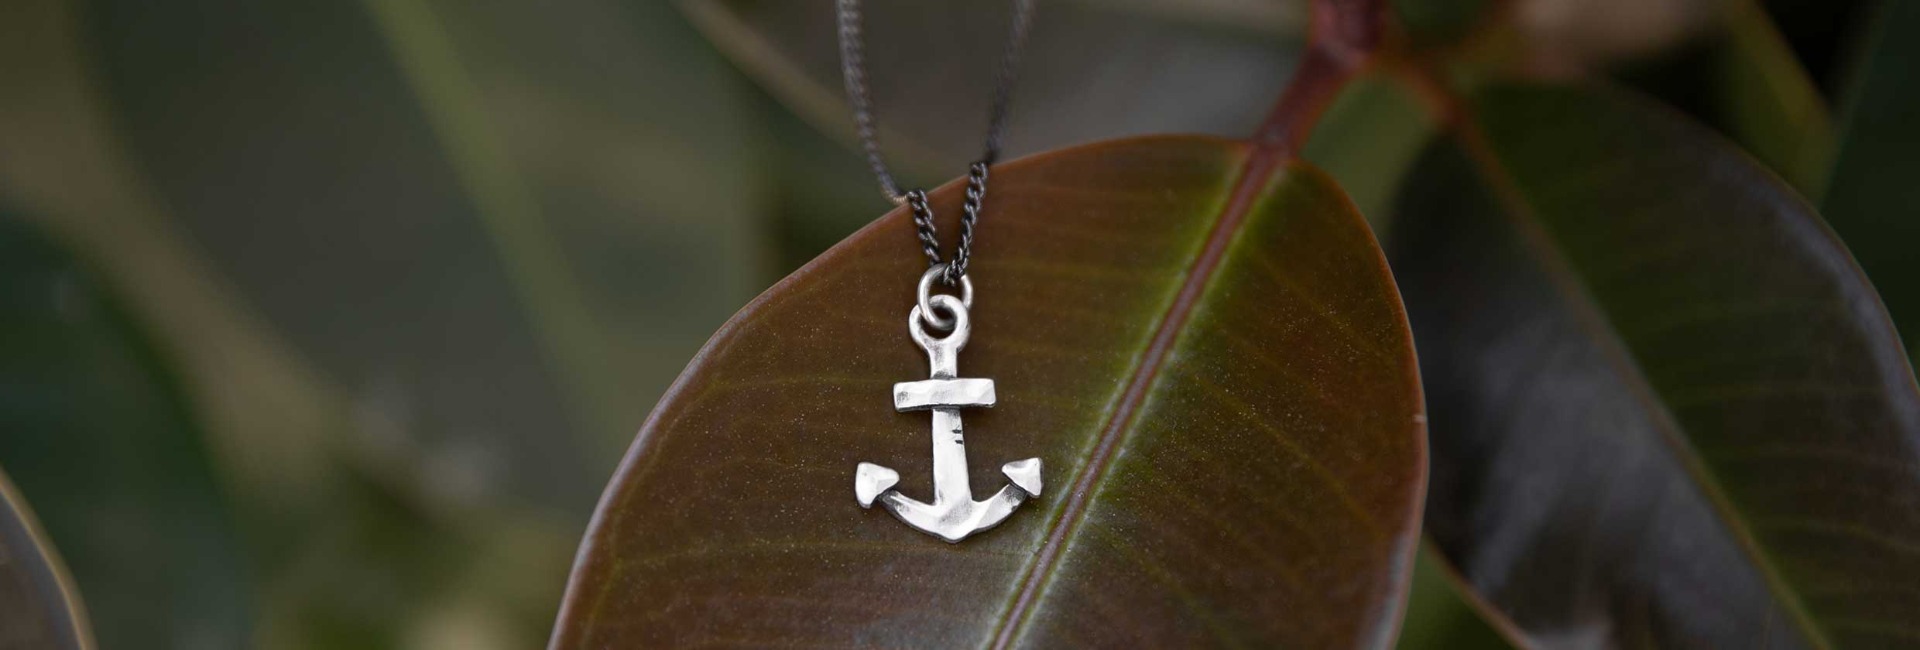 Anchor of my Soul Necklace by Stephen David Leonard